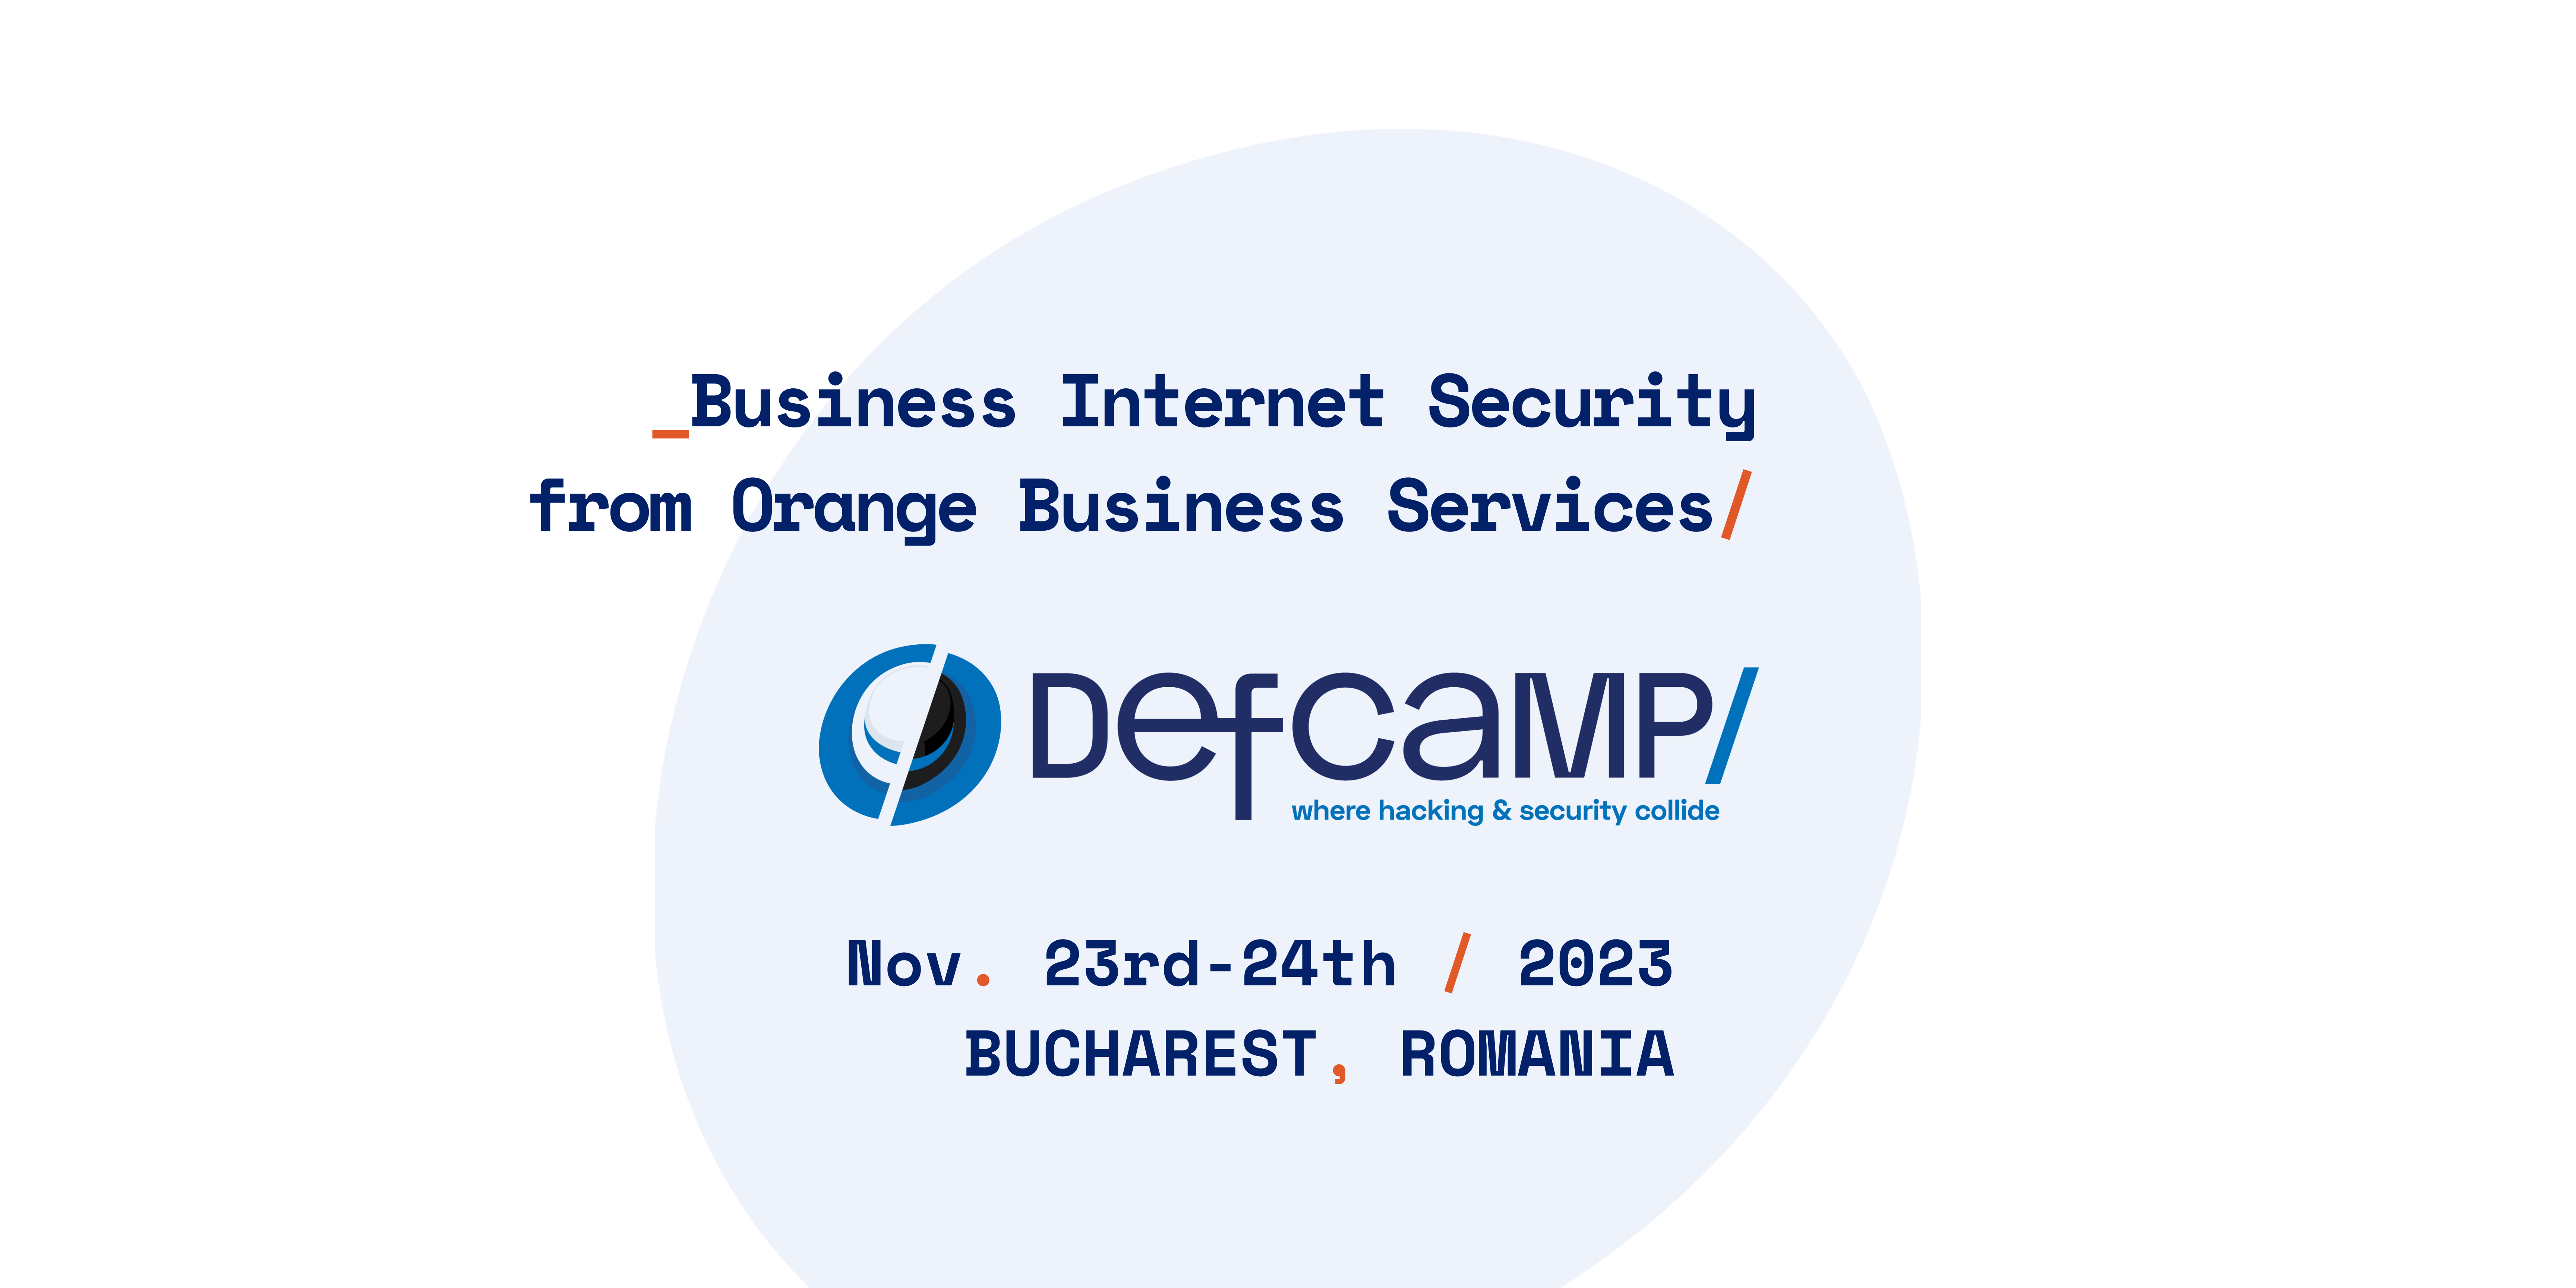 Business Internet Security from Orange Business Services